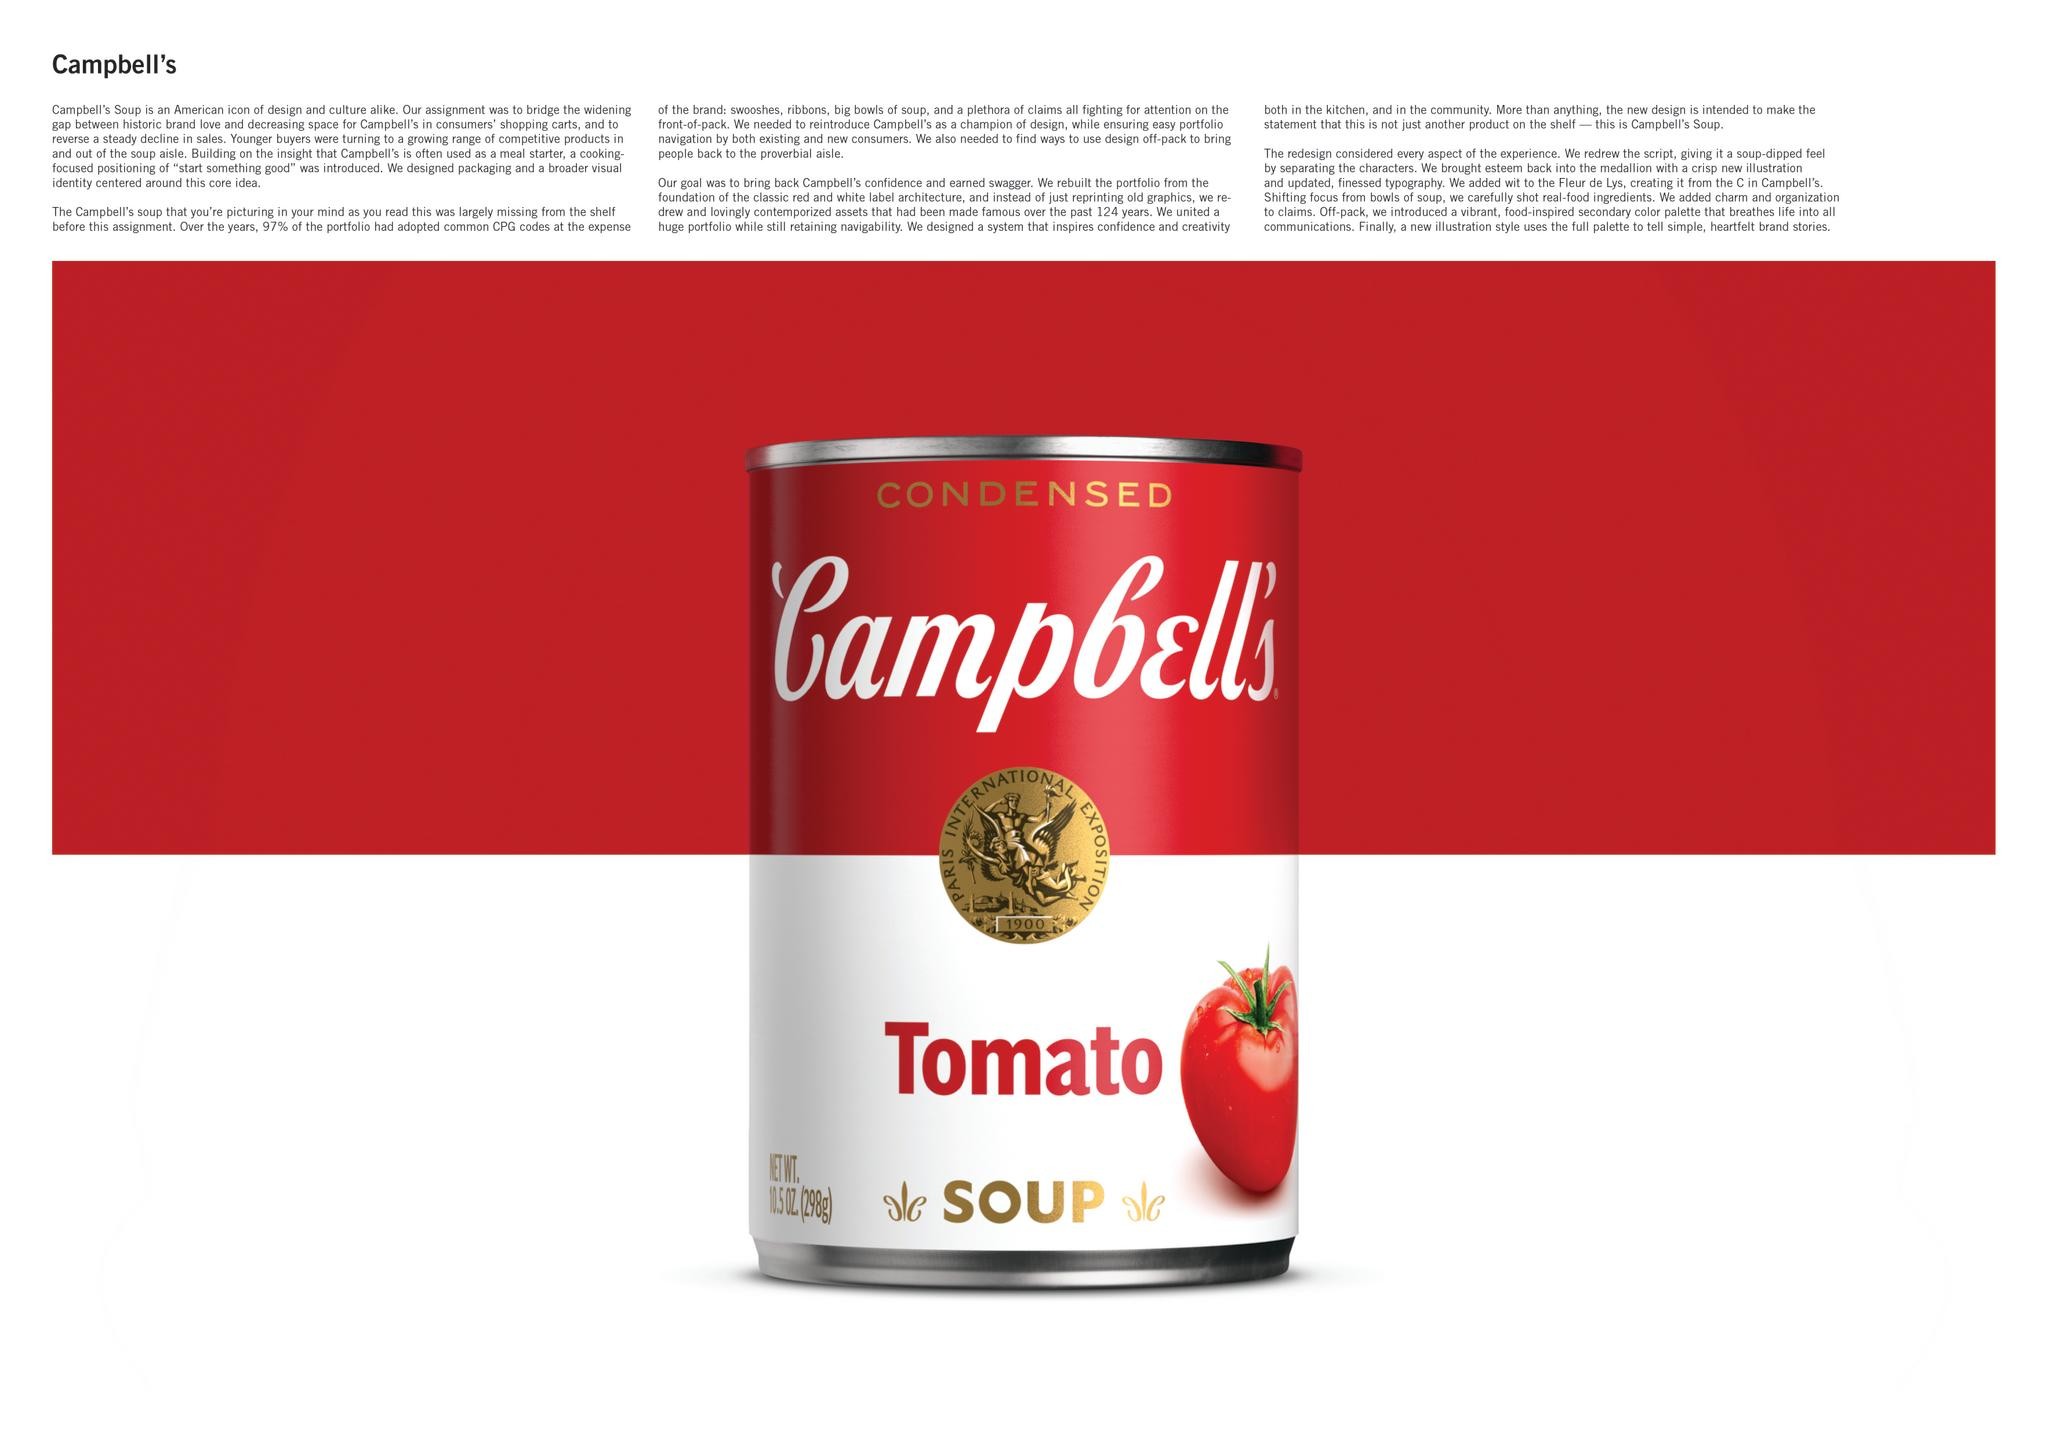 Campbell’s Red & White Condensed Soup Visual Identity